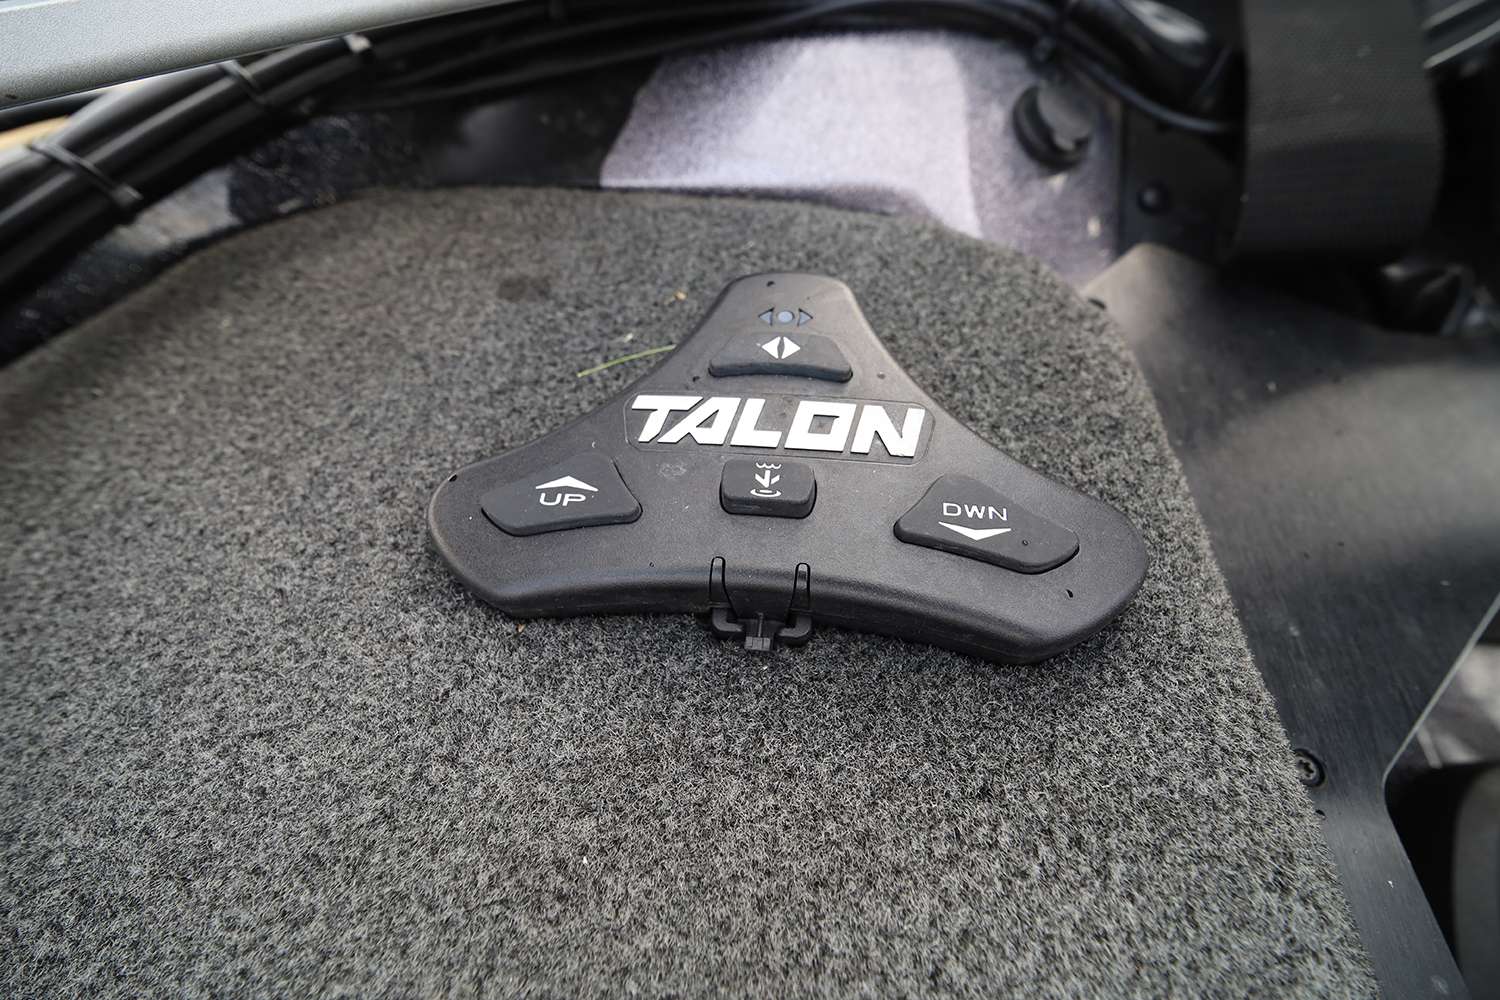 A Minn Kota Talon foot pedal is on the left-hand side of the Ultrex pedal.